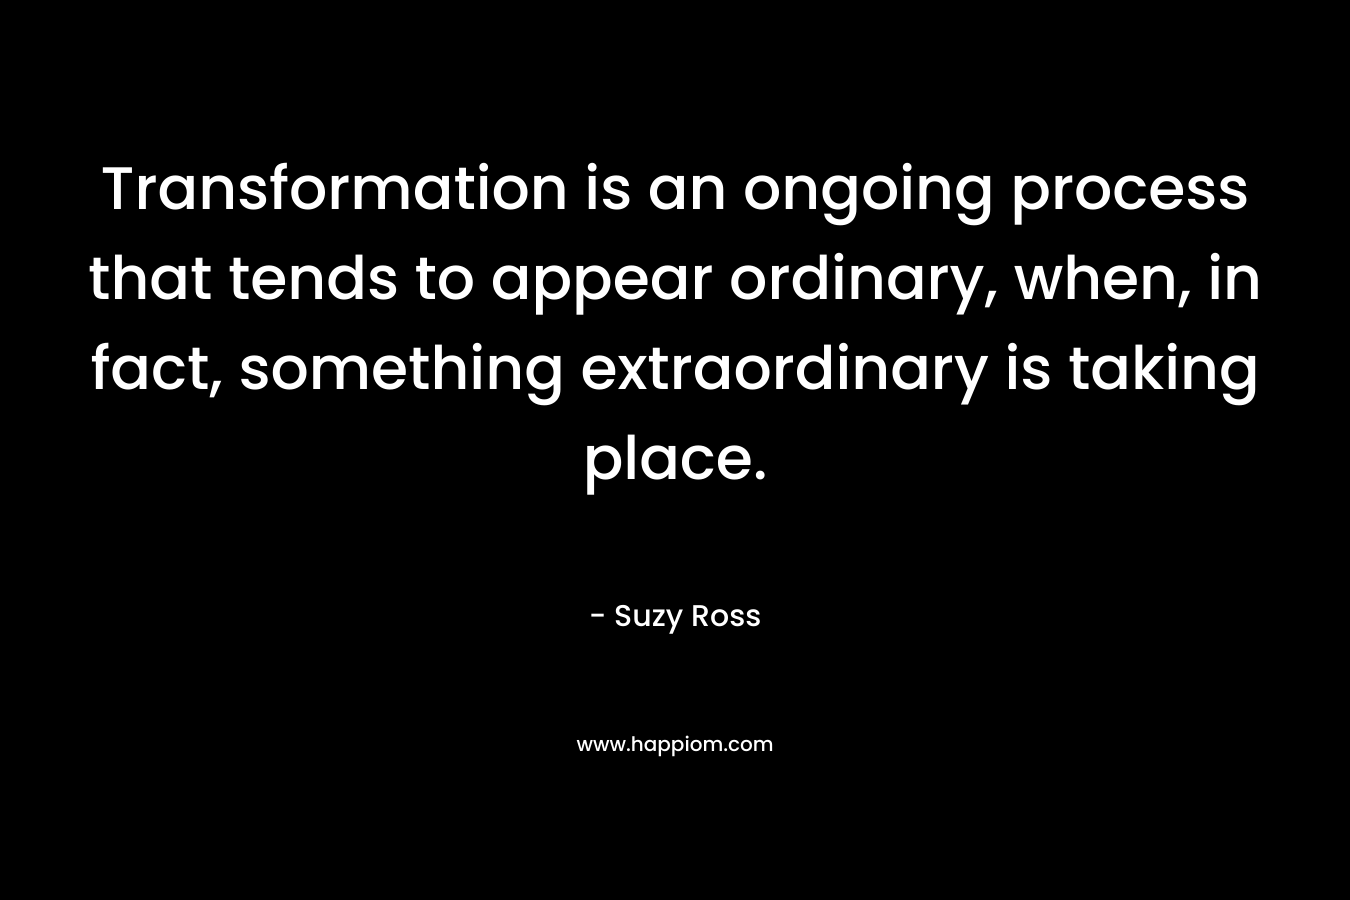 Transformation is an ongoing process that tends to appear ordinary, when, in fact, something extraordinary is taking place. – Suzy Ross